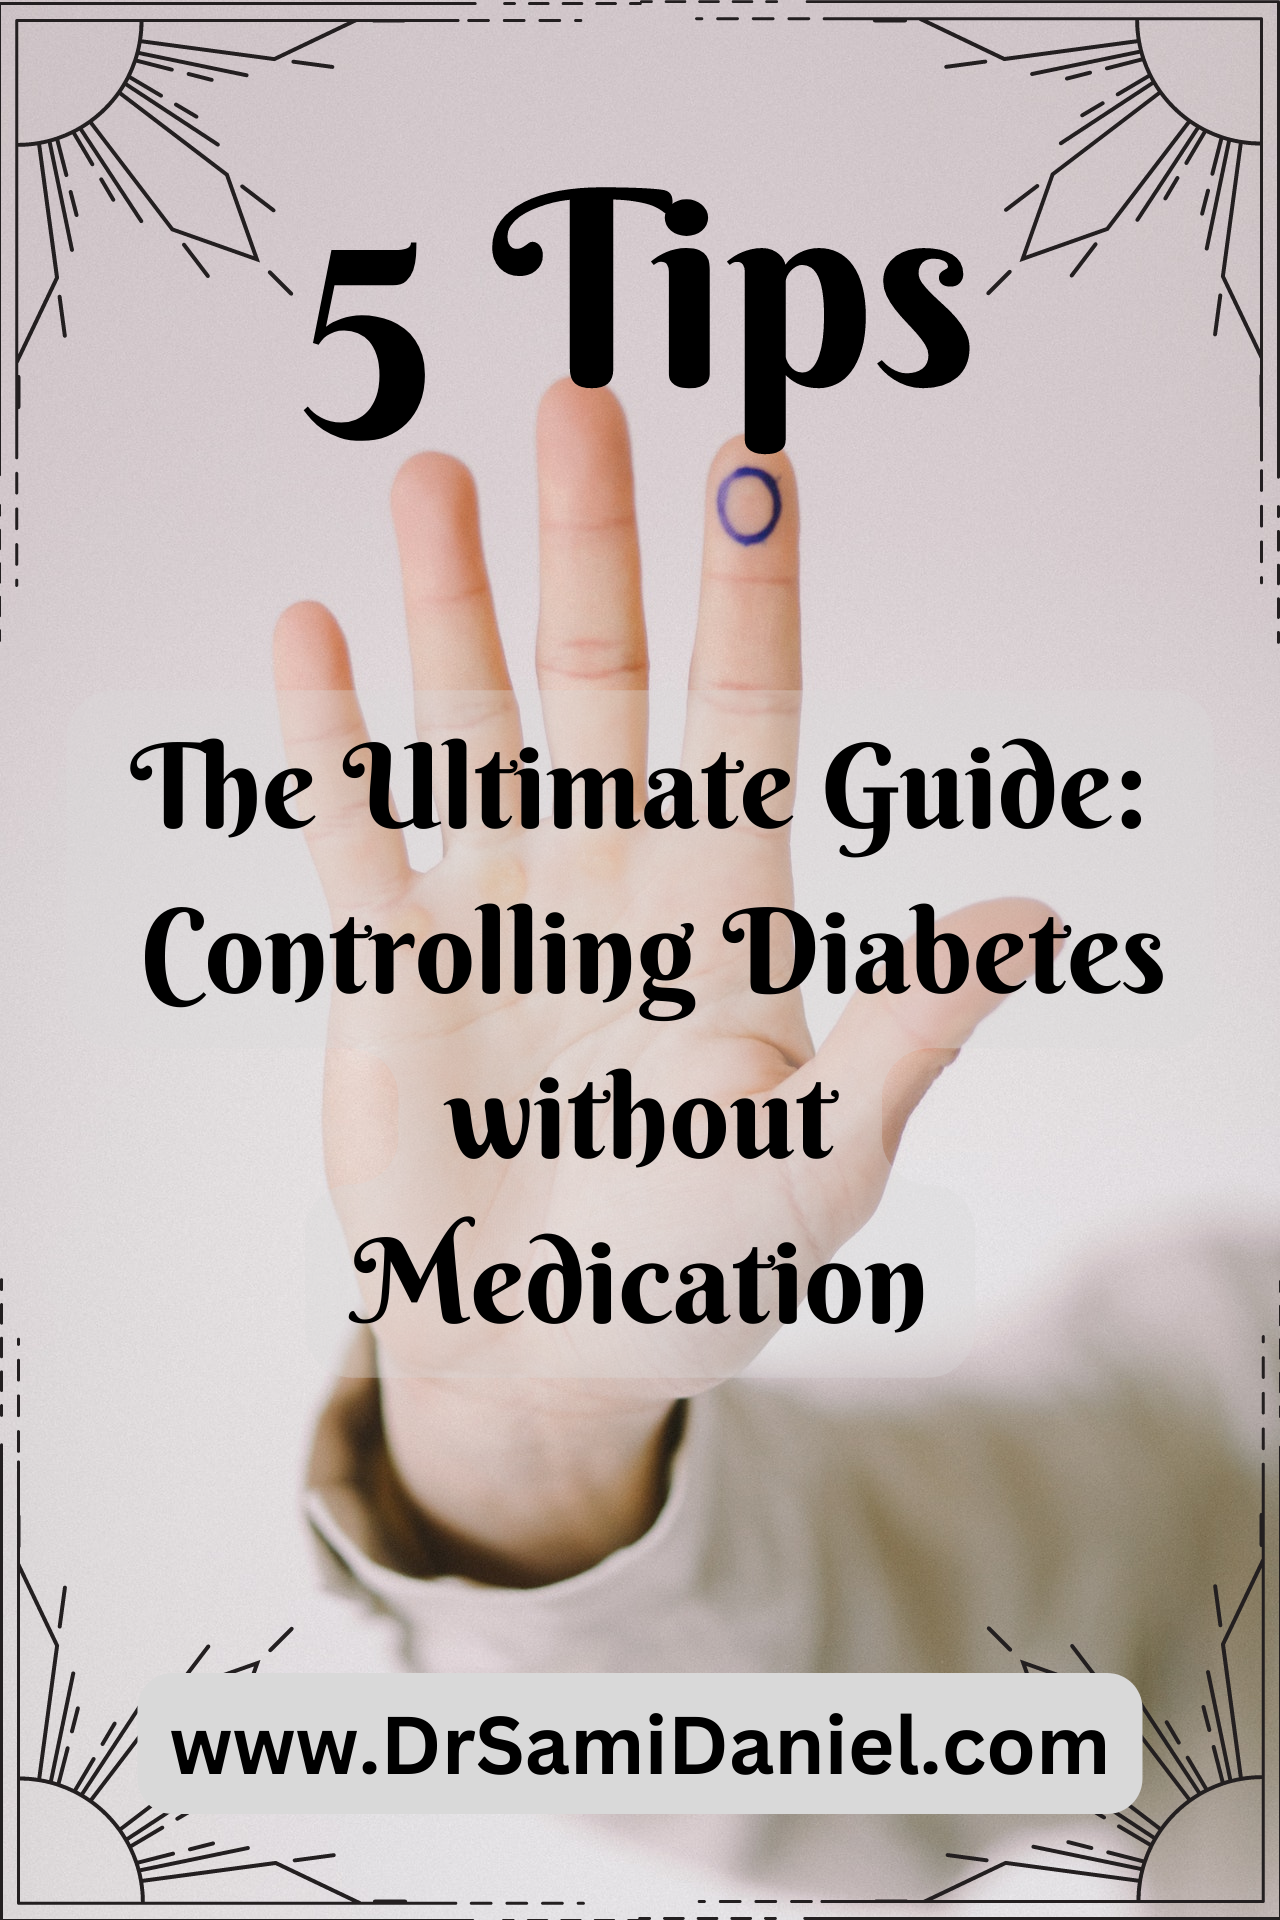 5 Tips: The Ultimate Guide to Controlling Diabetes without Medication